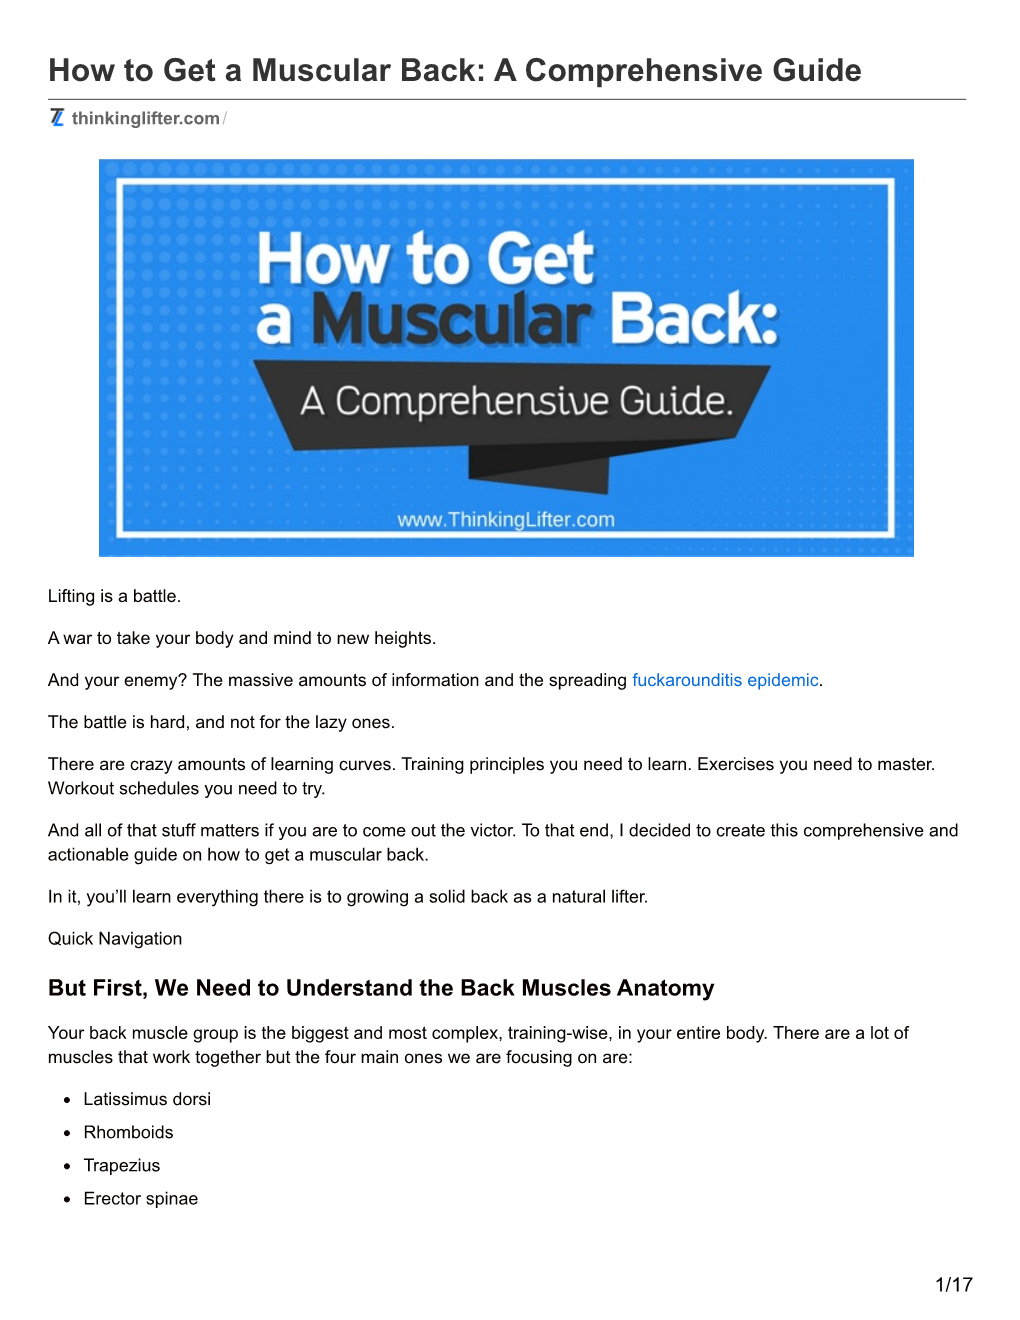 How to Get a Muscular Back: a Comprehensive Guide